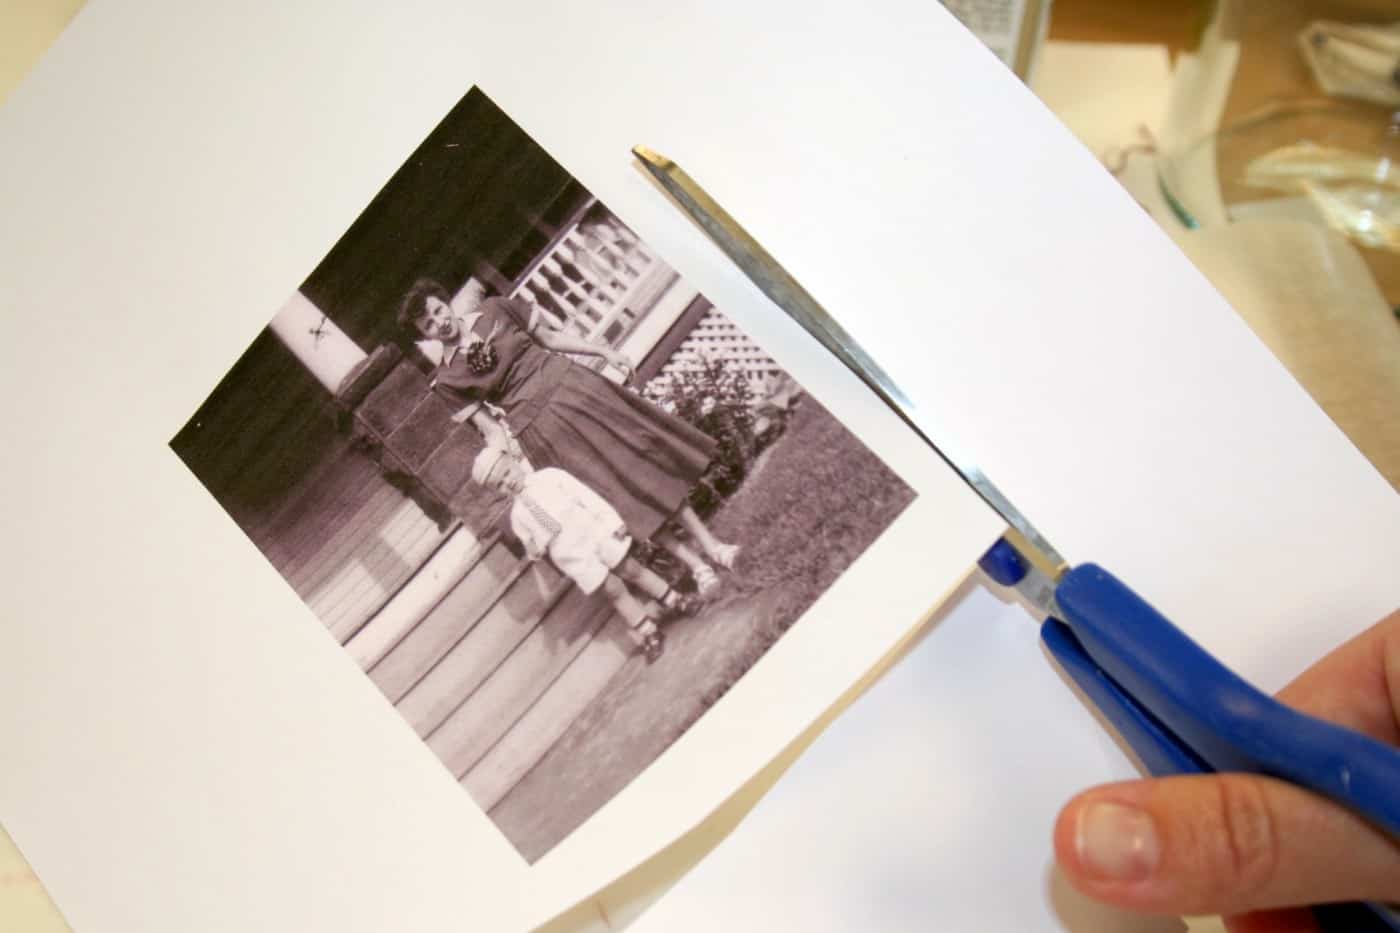 Cutting out a vintage image with blue handled scissors